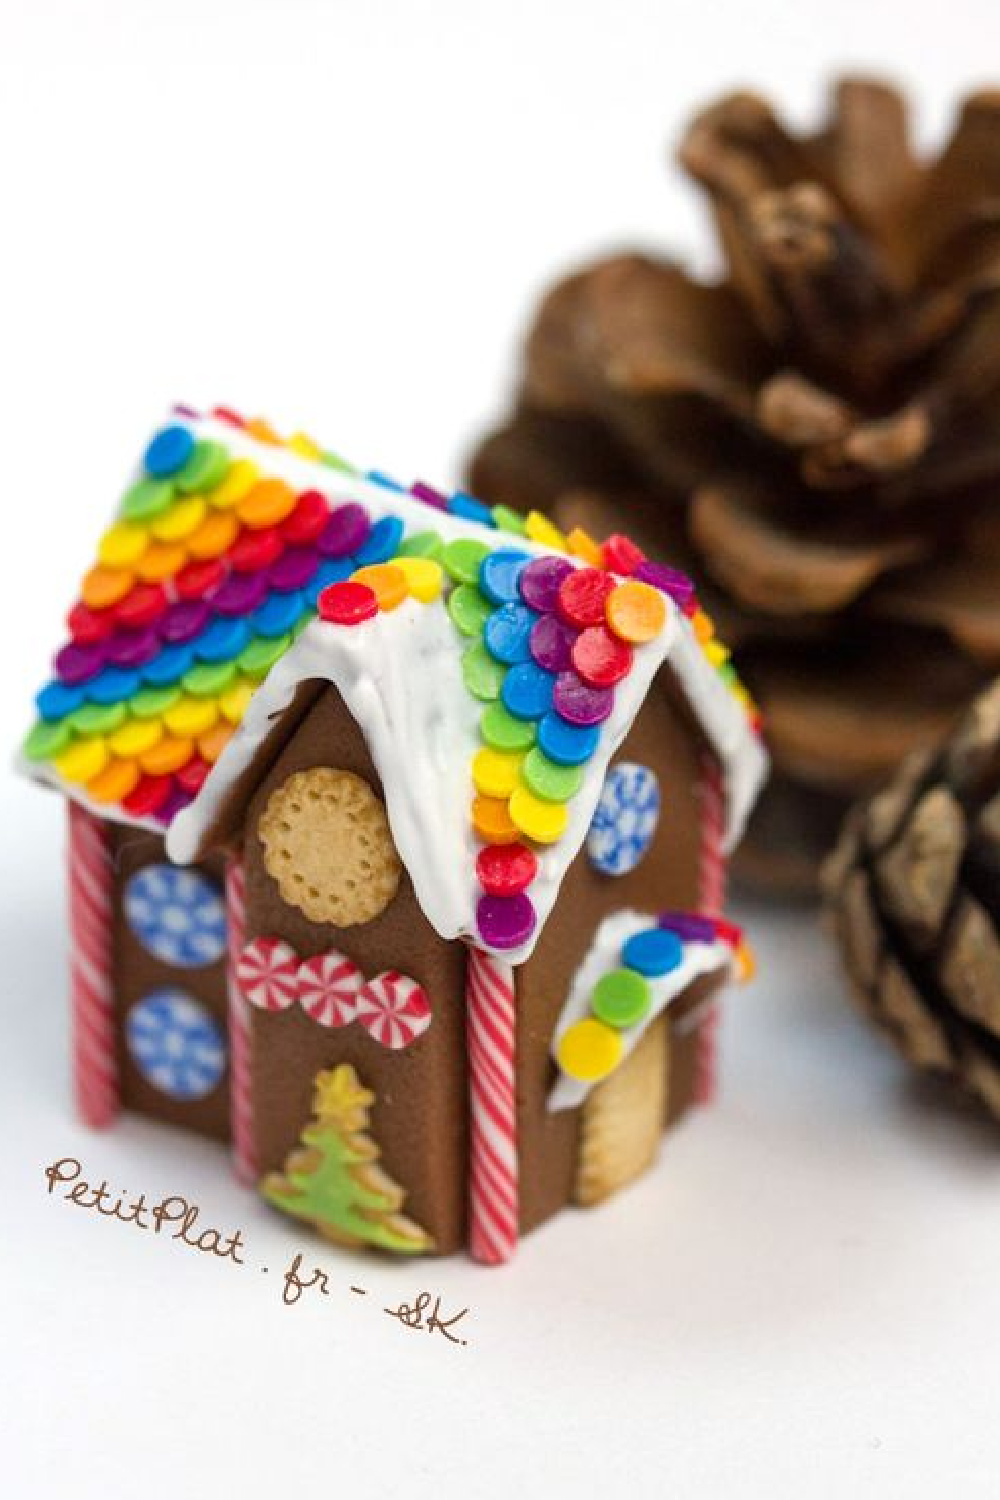 Miniature Gingerbread Houses with vivid colorful Polymer Clay